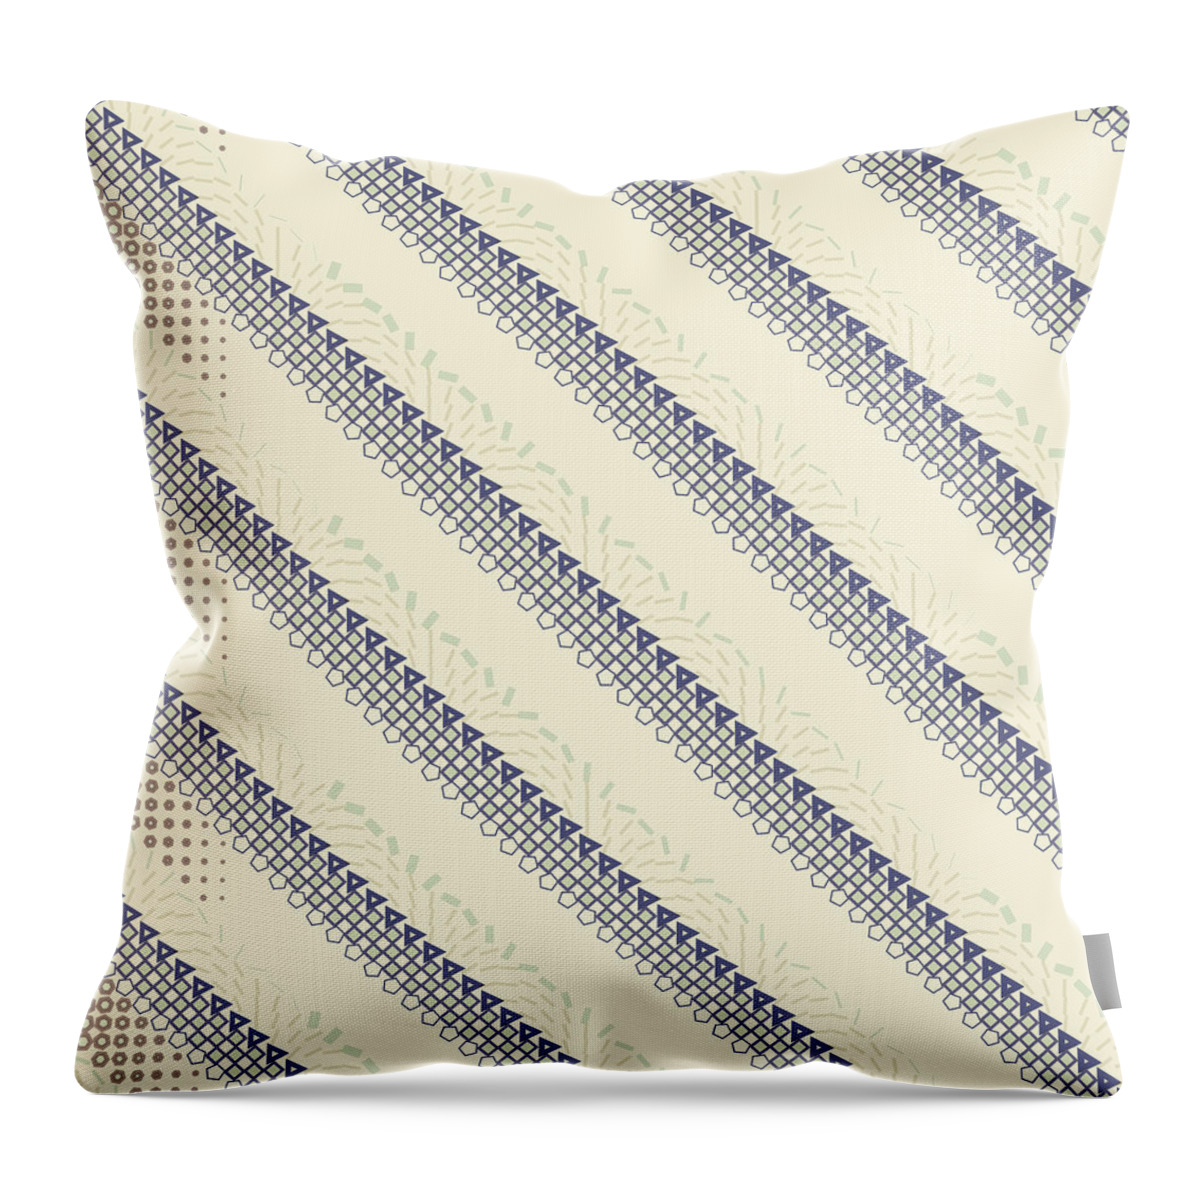 Abstract Throw Pillow featuring the digital art Pattern 2 by Marko Sabotin